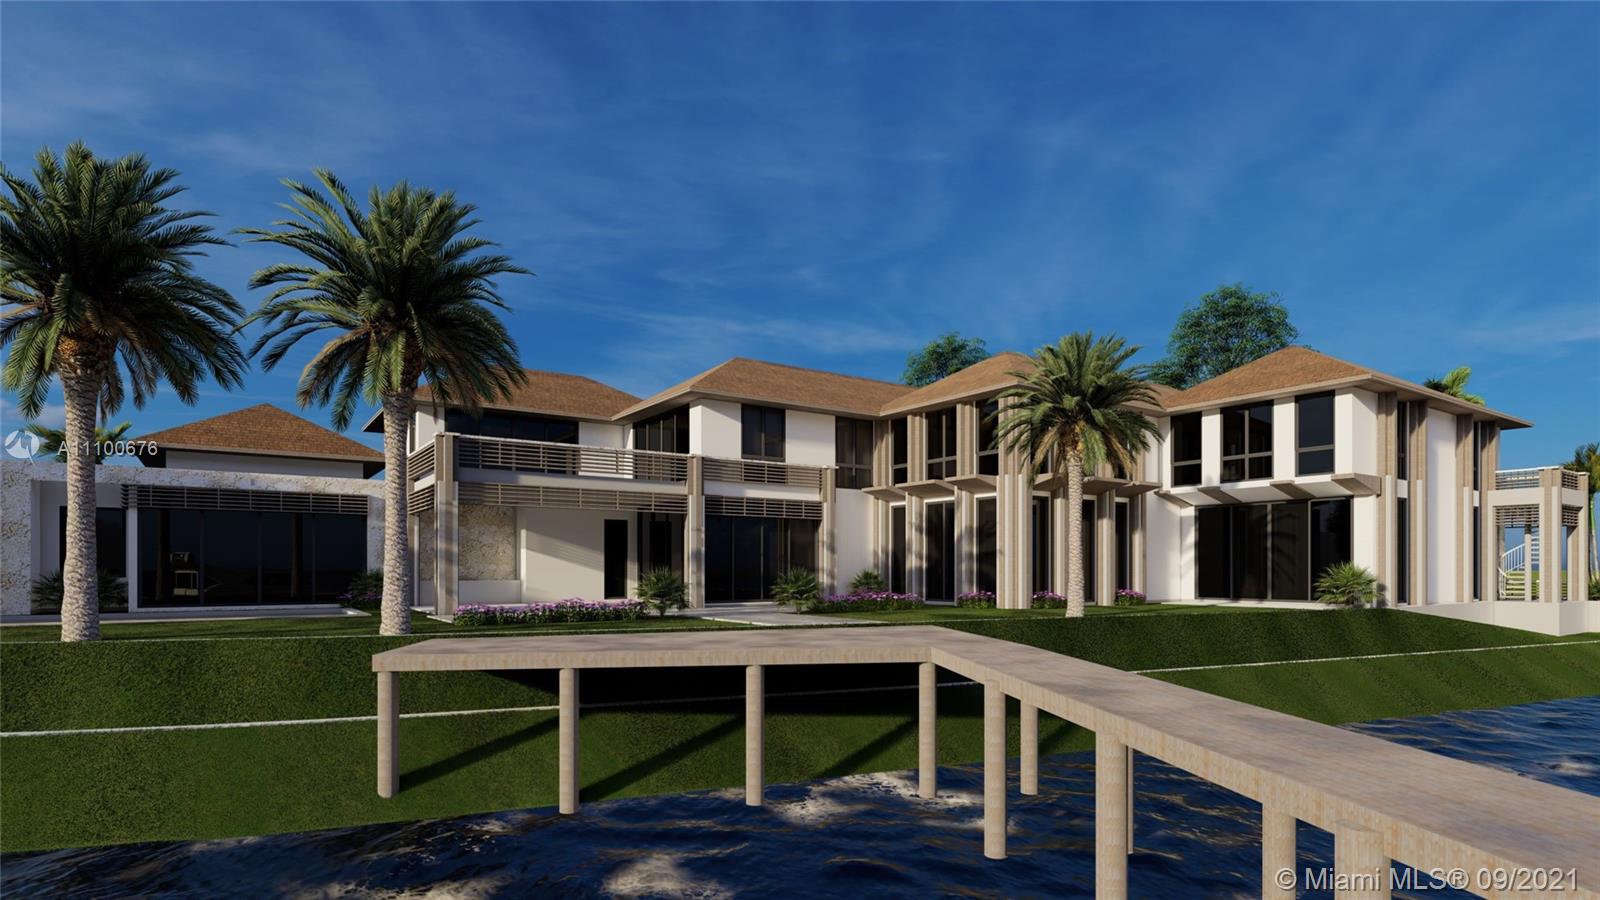 New construction, with 320' of private Admirals Cove Waterfrontage. Long water views from every angle of this 7 Bedroom 8.5 Bathroom masterpiece. This new construction home designed by Affiniti Architects and is over 10,000 sq ft living, and 26,000 sq ft total.